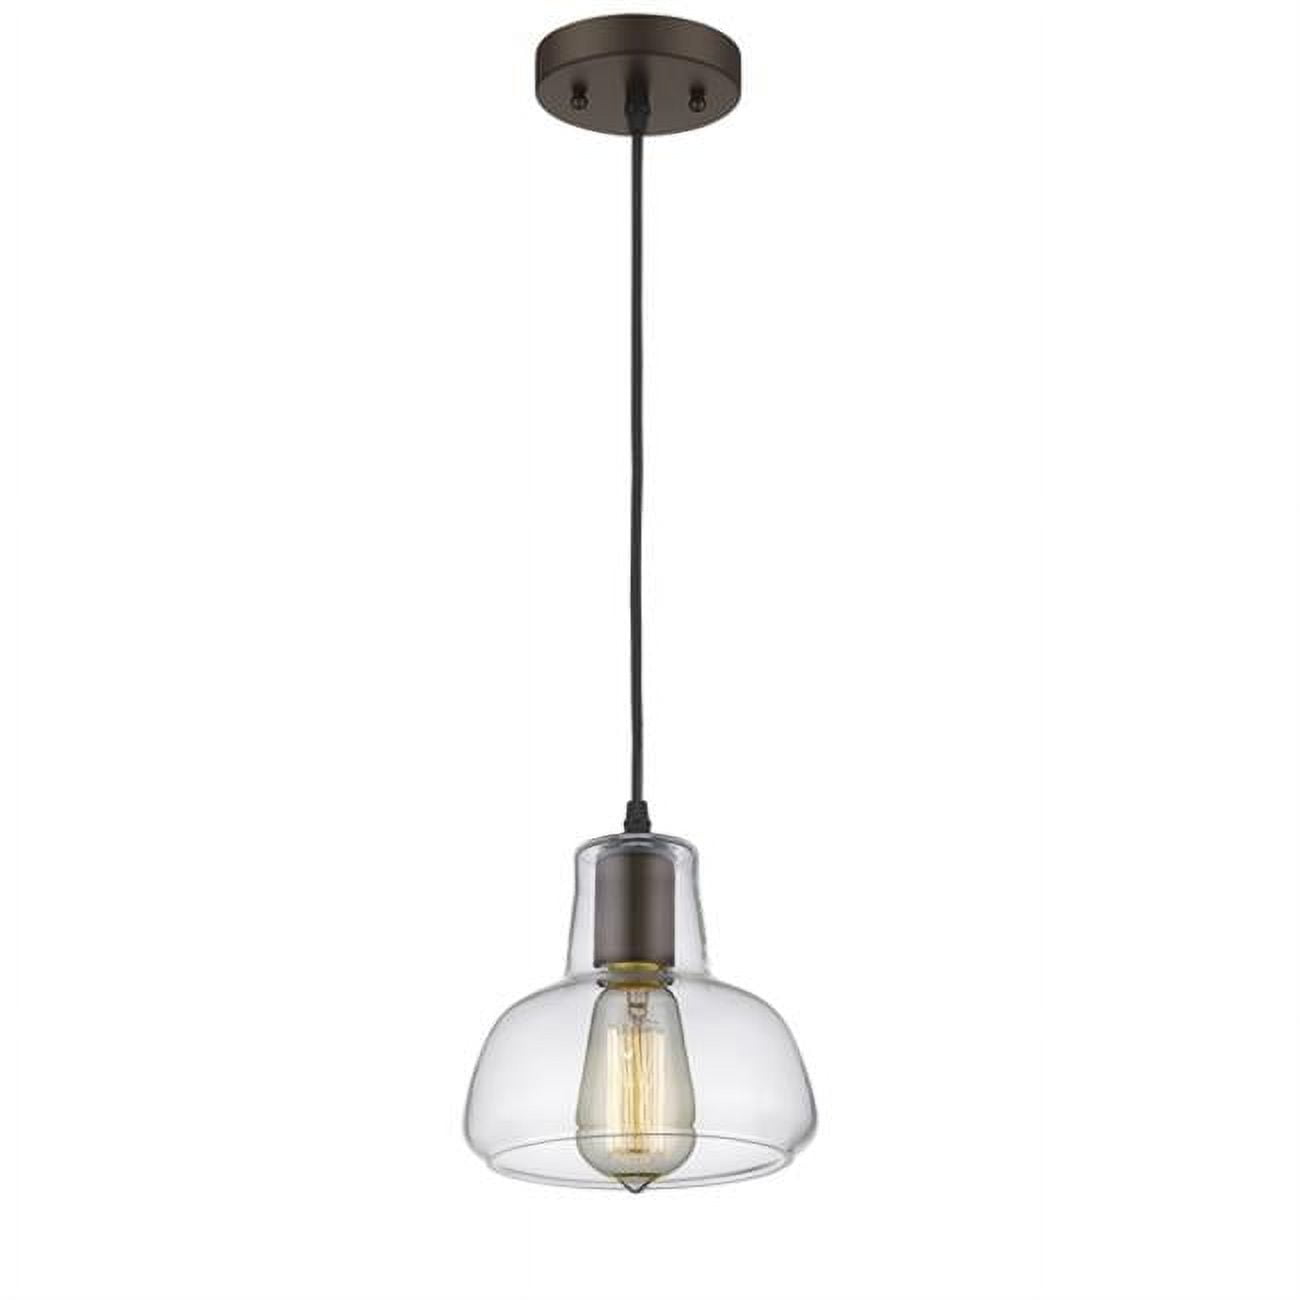 Ch58011cl07-dp1 7 In. Shade Lighting Ironclad Industrial-style 1 Light Rubbed Bronze Ceiling Mini Pendant - Oil Rubbed Bronze